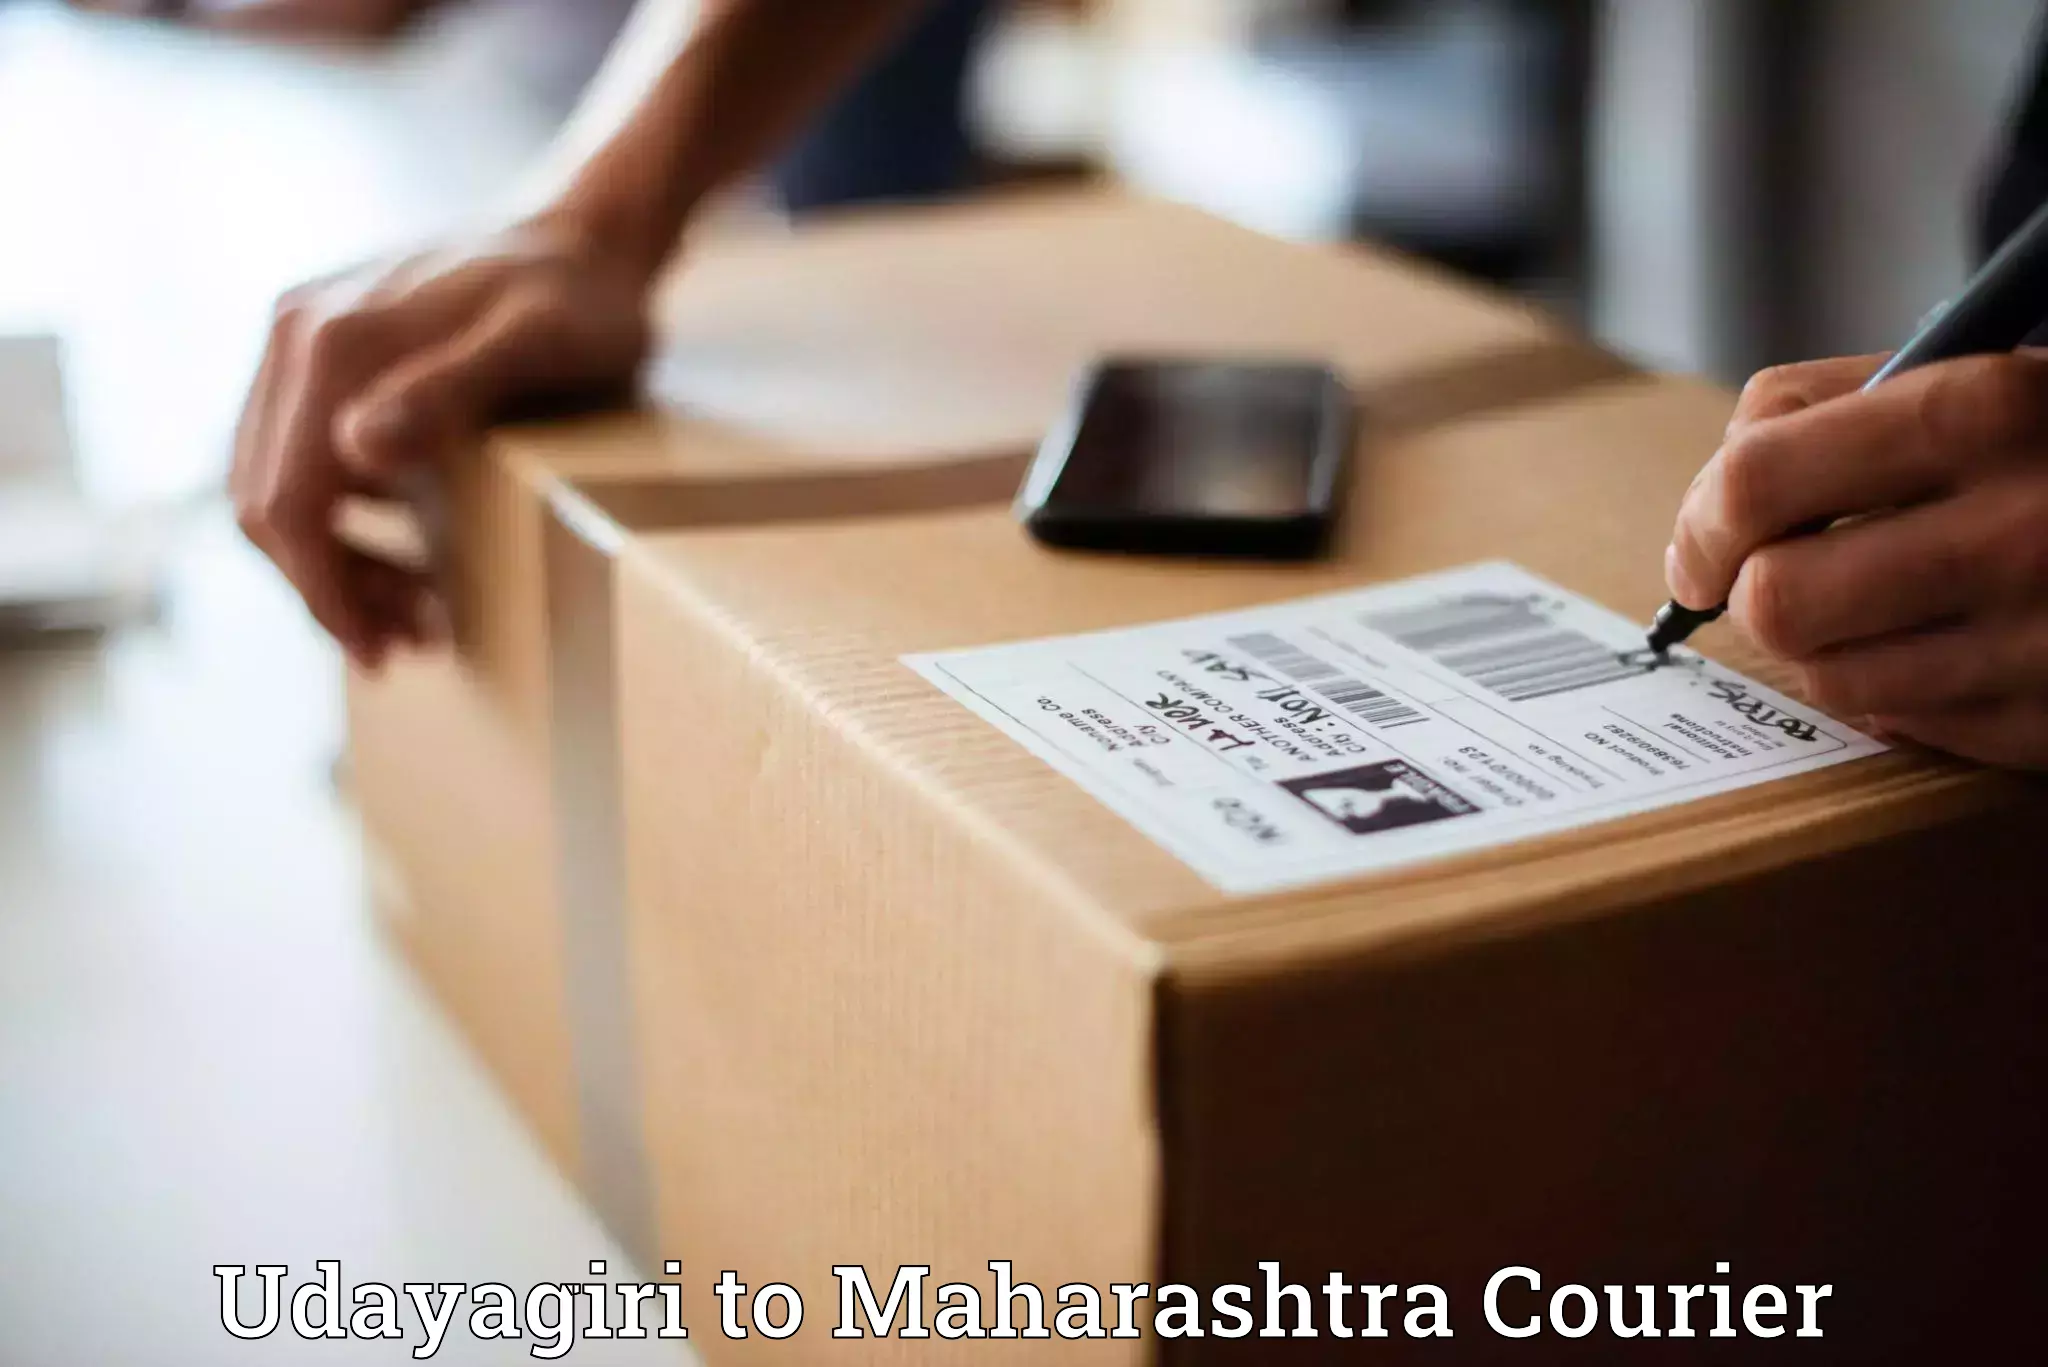 Parcel service for businesses Udayagiri to Panchwad